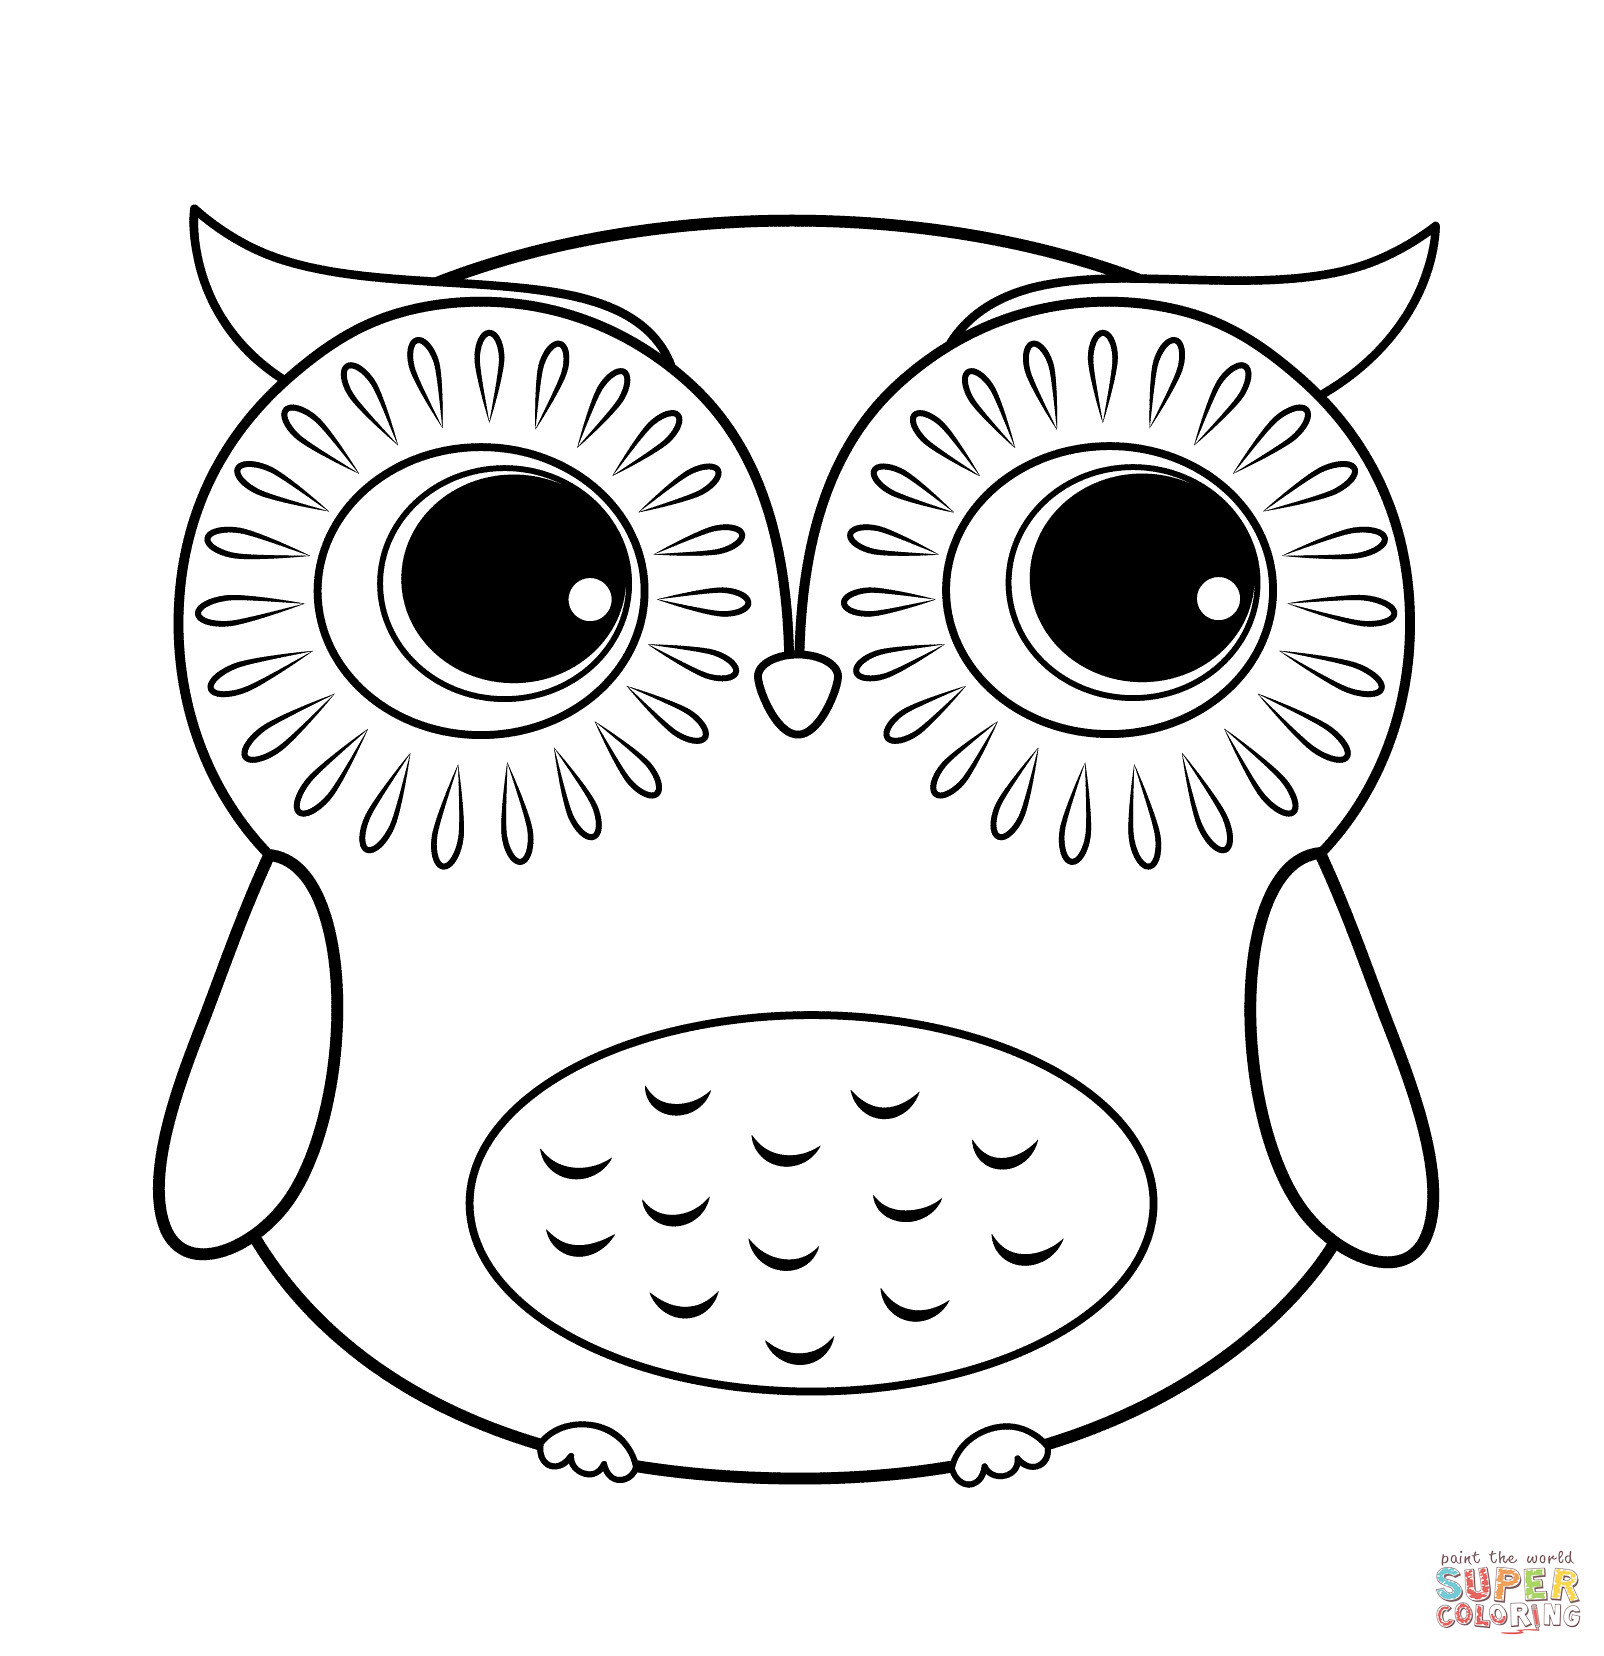 Printable Owl Coloring Pages
 Cartoon Owl coloring page